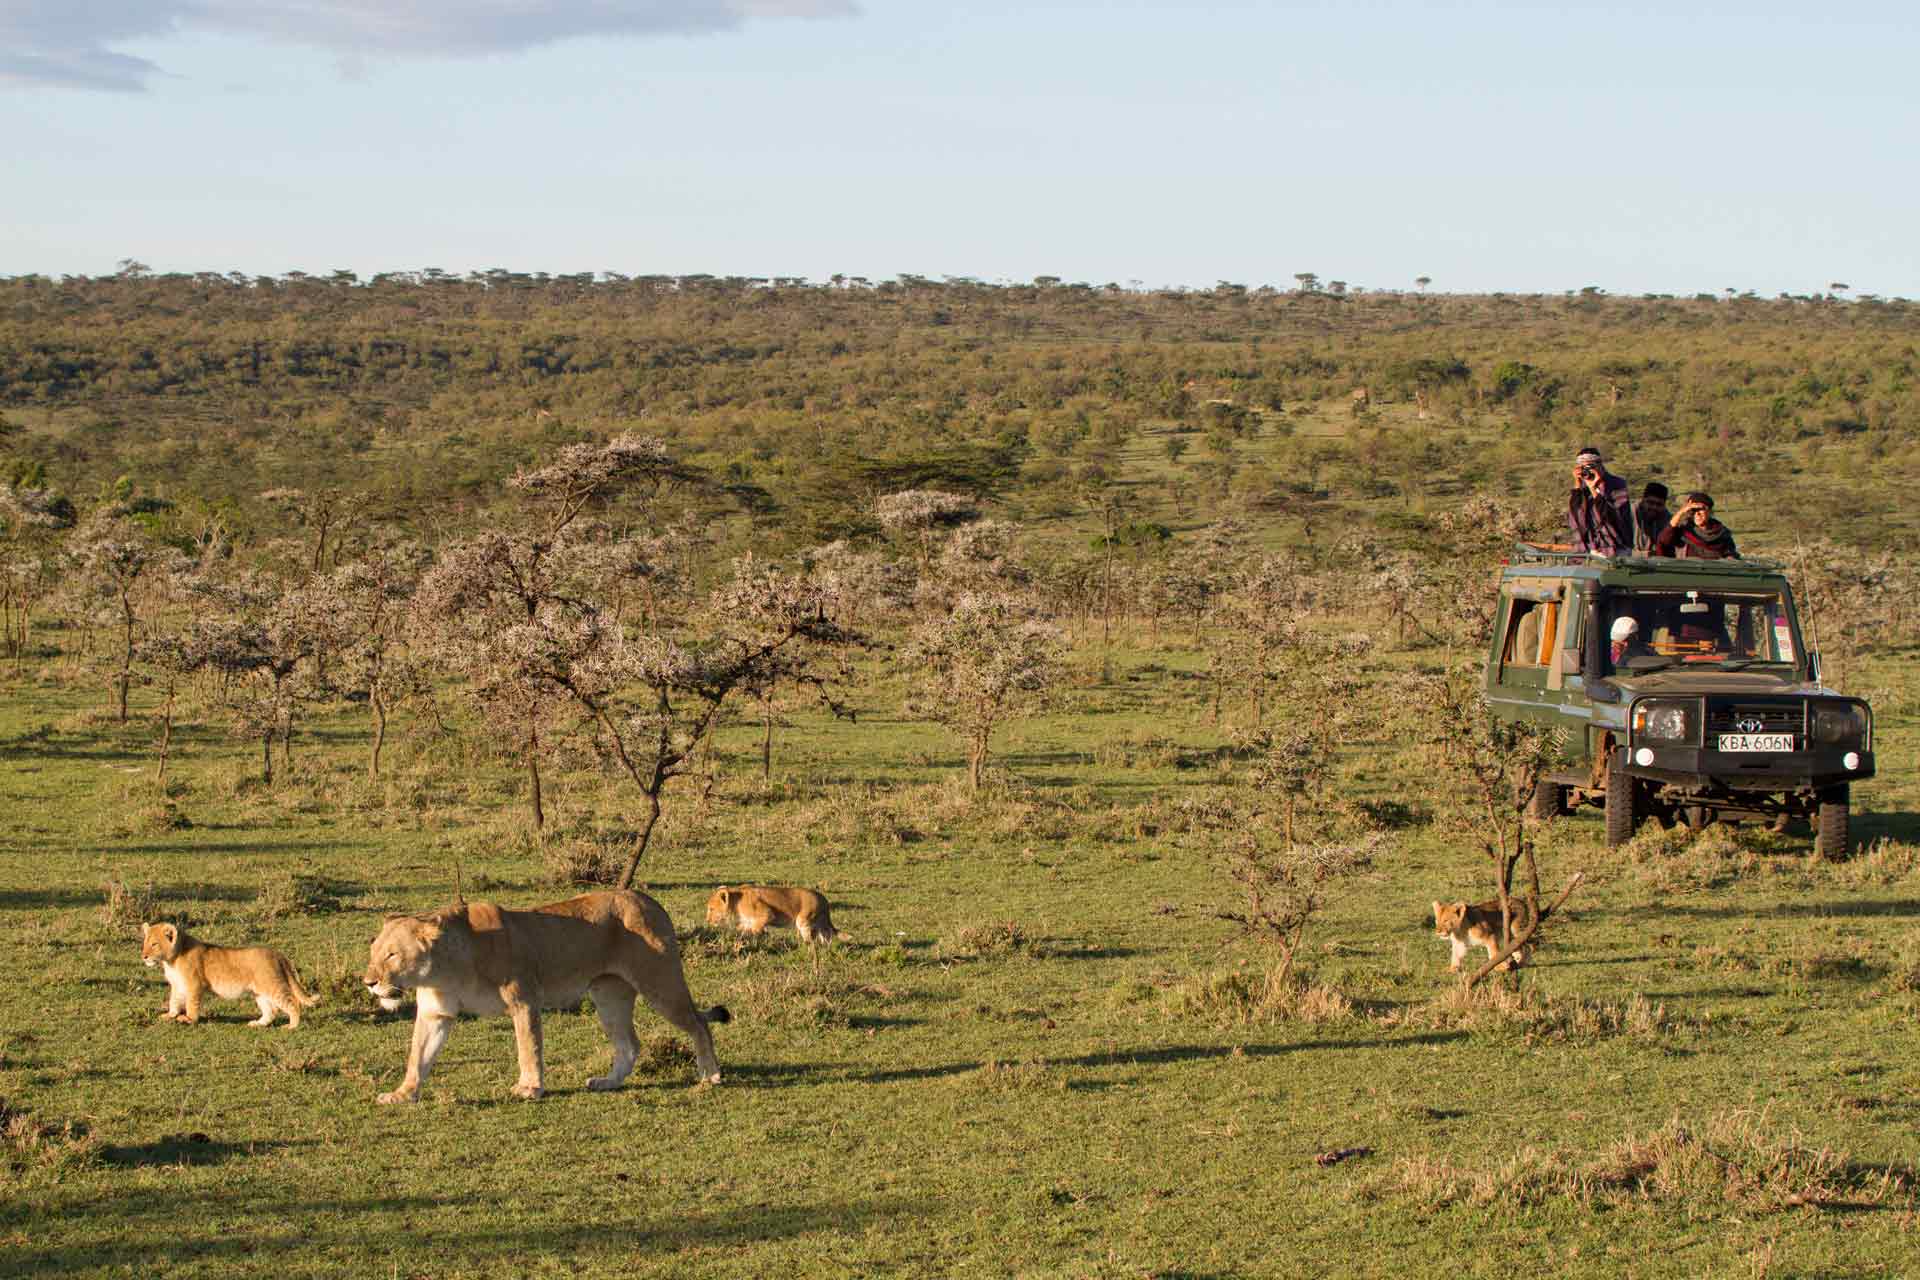 East African lioness (Panthera leo nubica) and her cubs being watched by people in a safari vehicle, Mara Naboisho Conservancy, Kenya